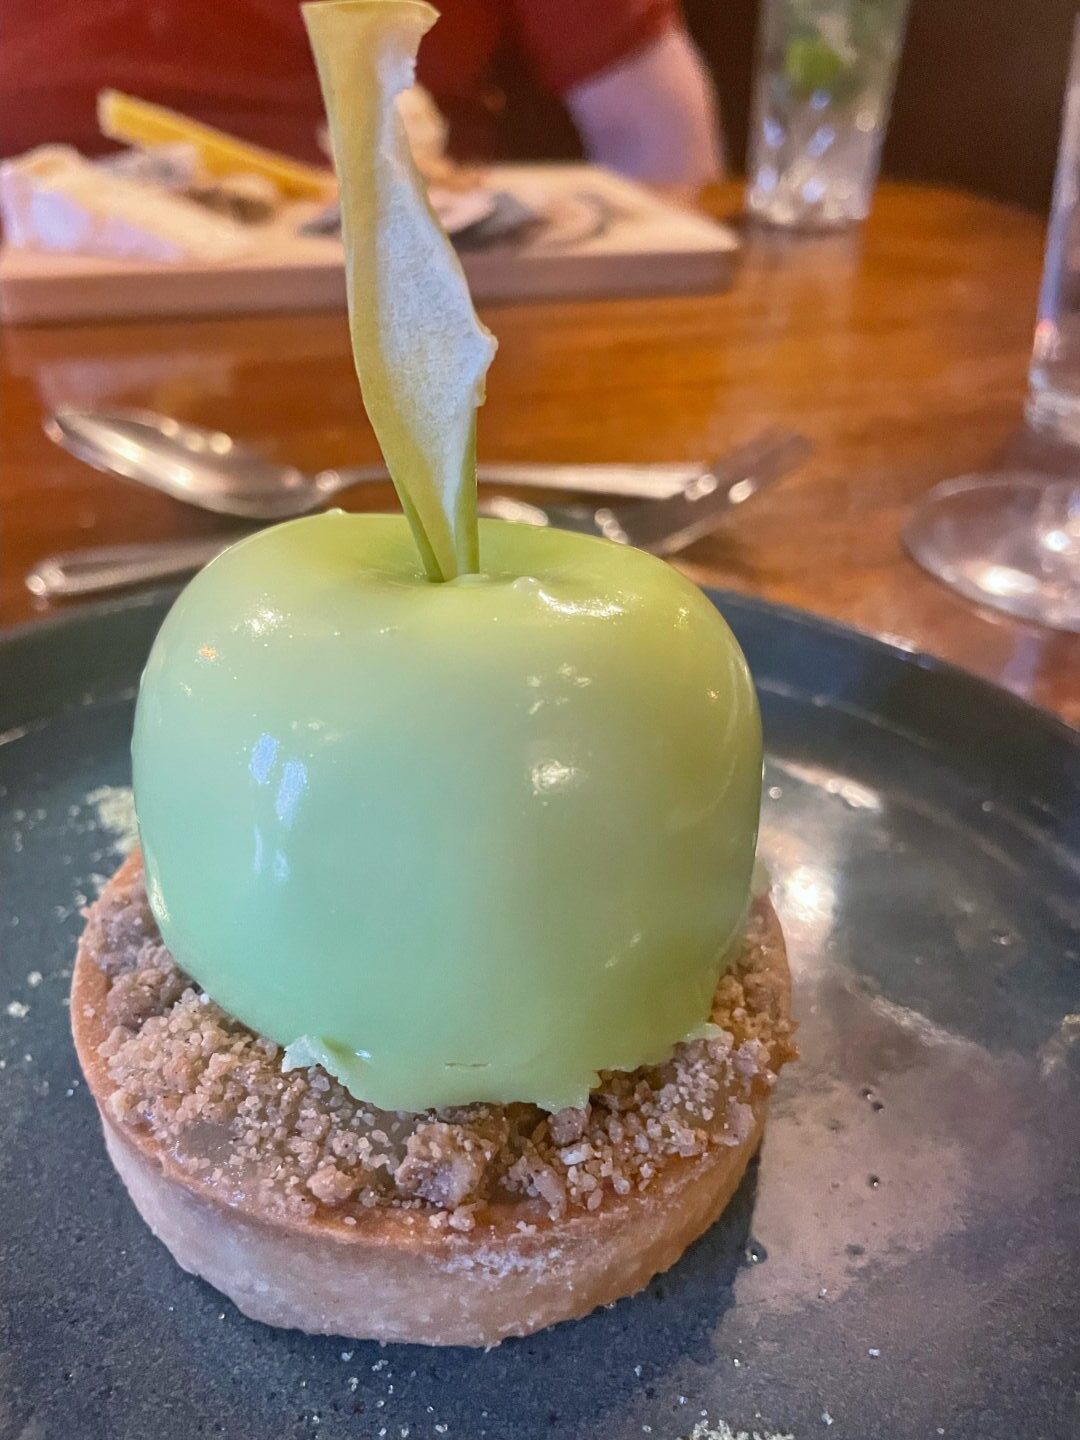 The Apple in the Knipoch Hotel.